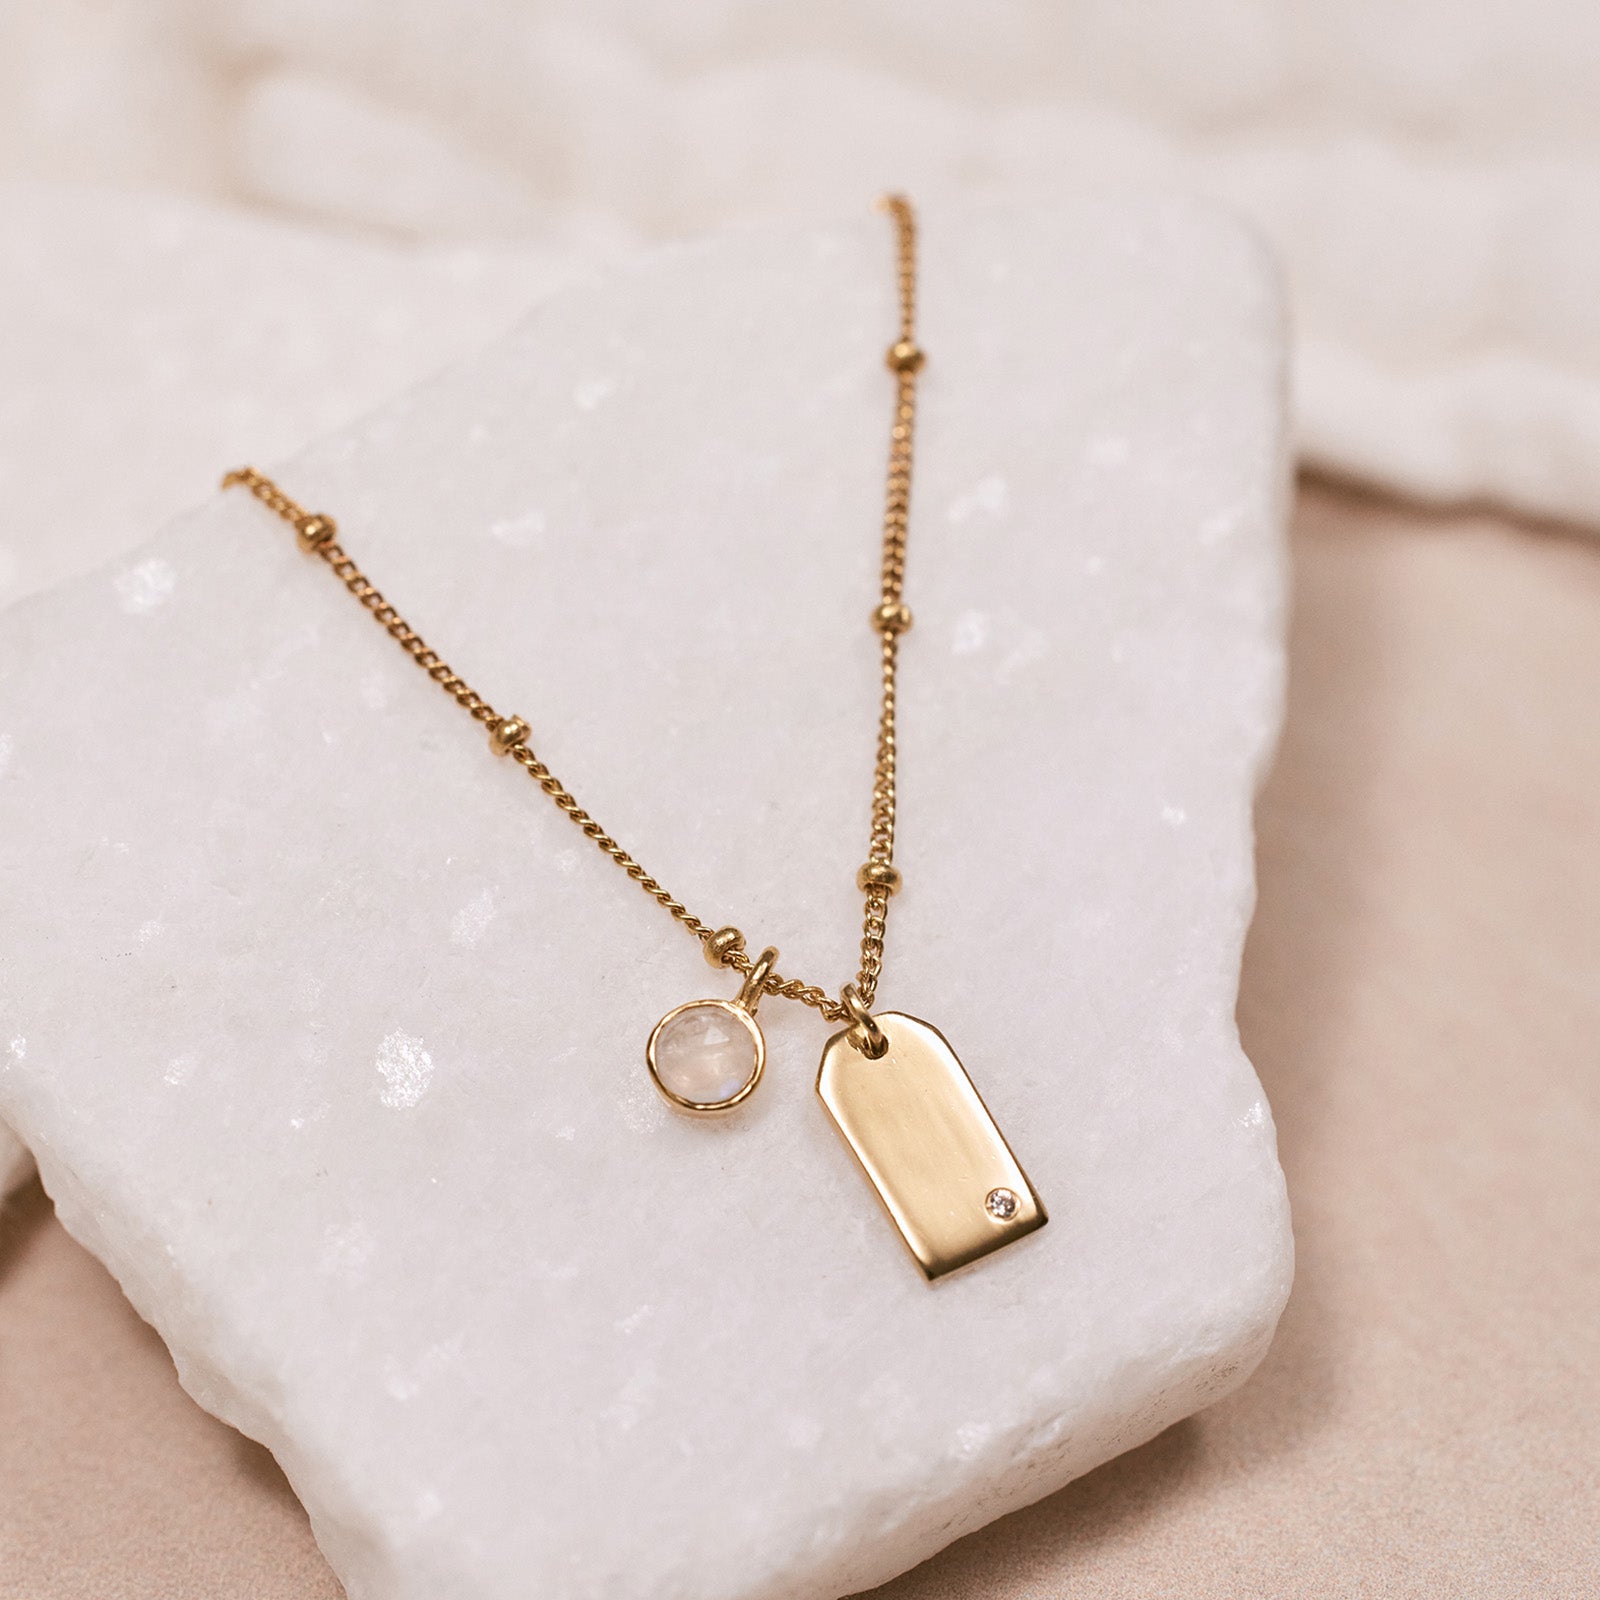 Bespoke Dog Tag Necklace in Gold Plated, Women's by Gorjana